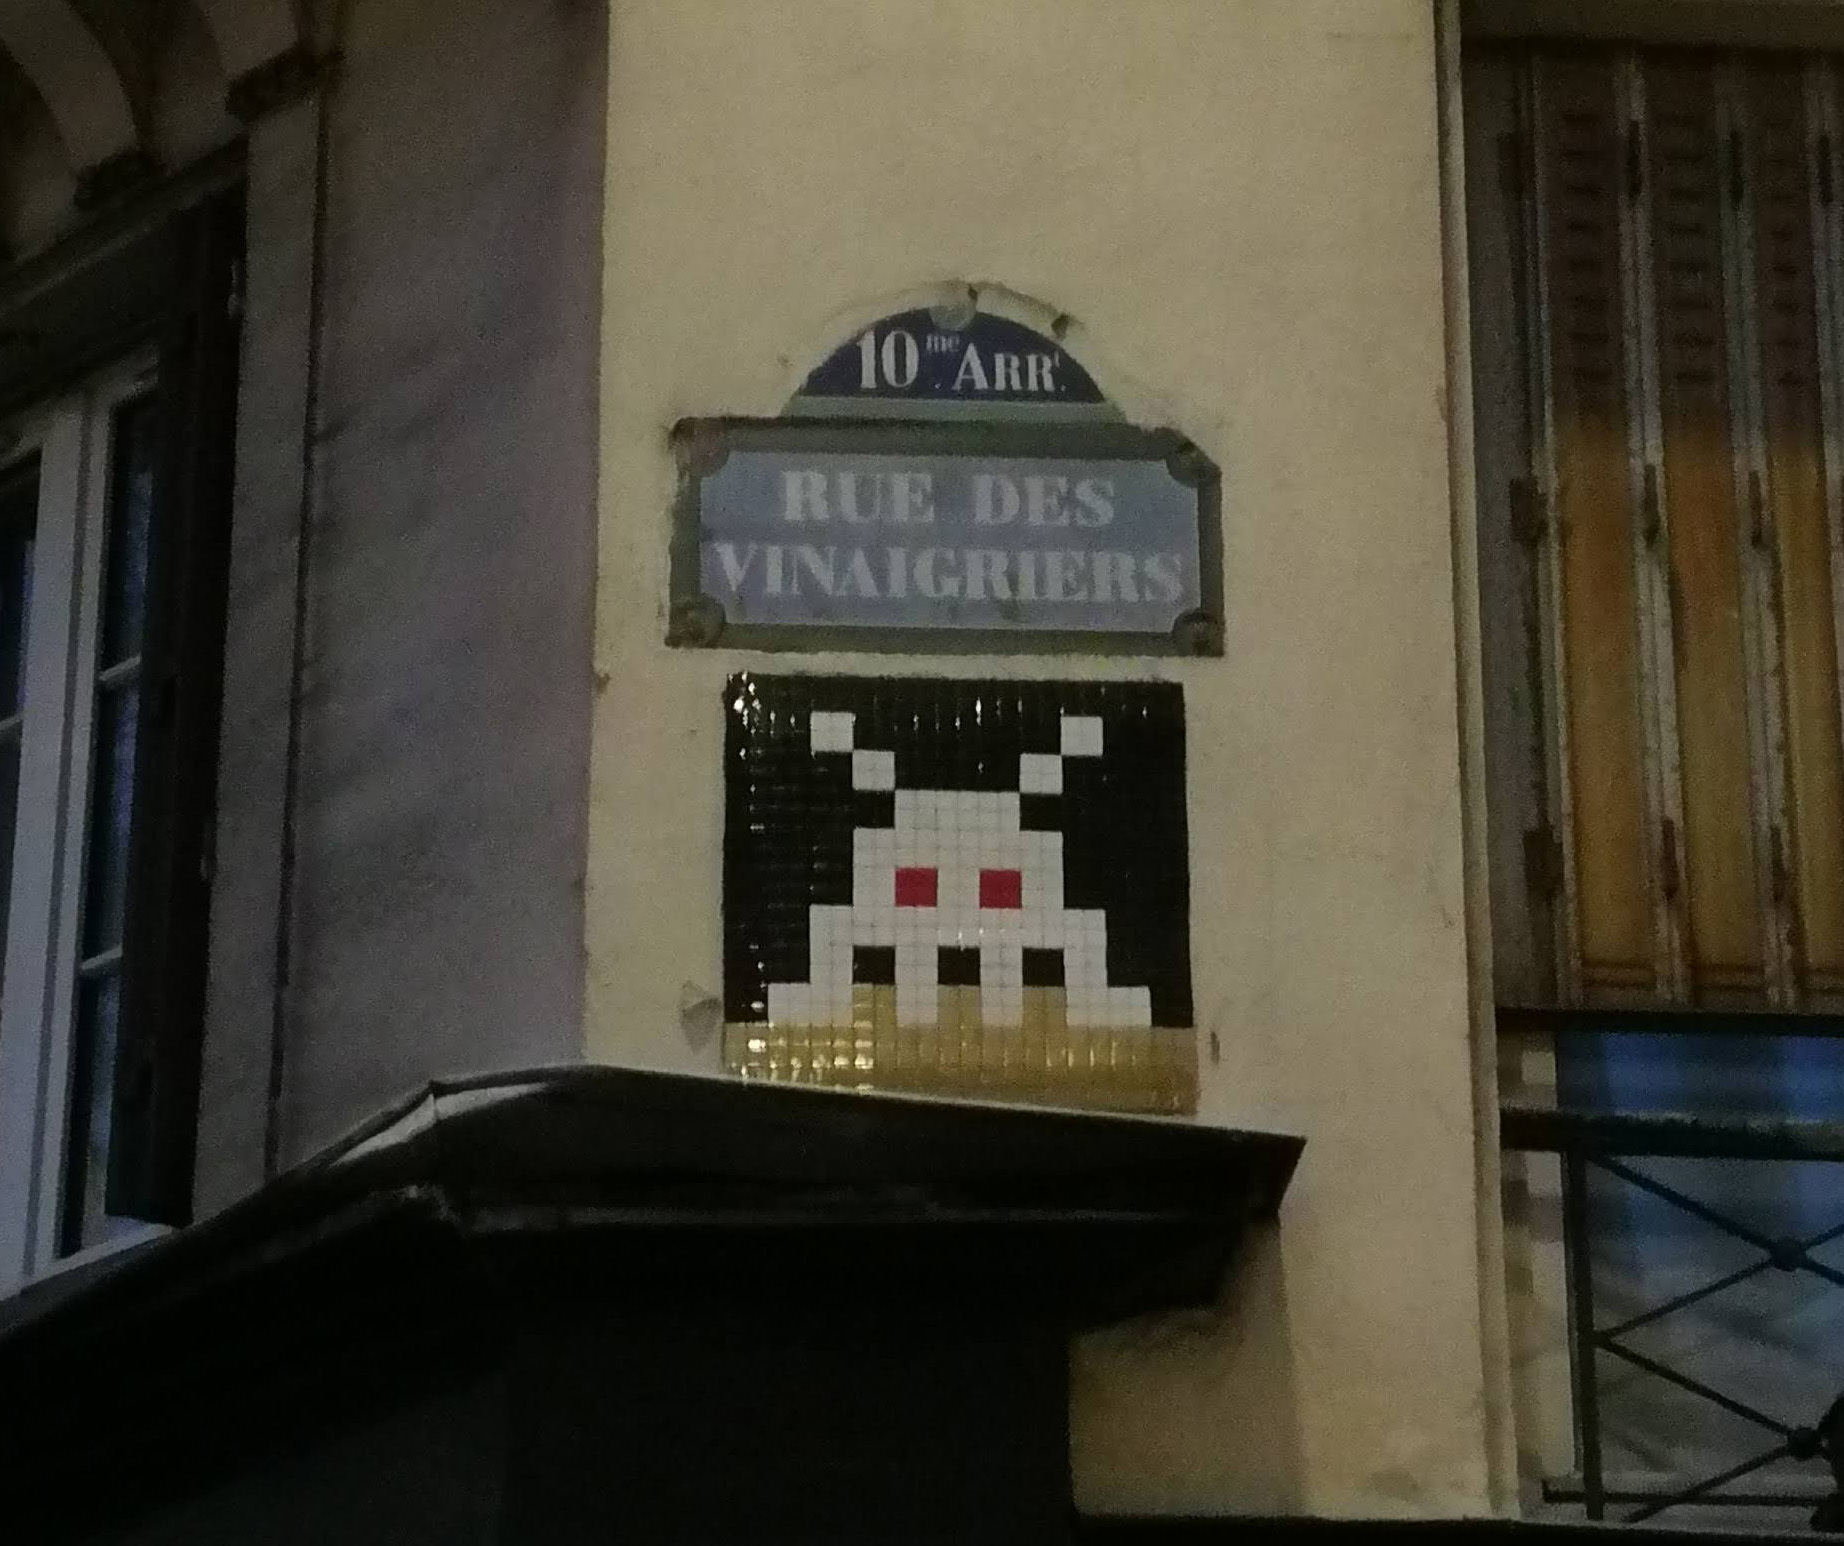 Mosaic 662  by the artist Invader captured by Rabot in Paris France